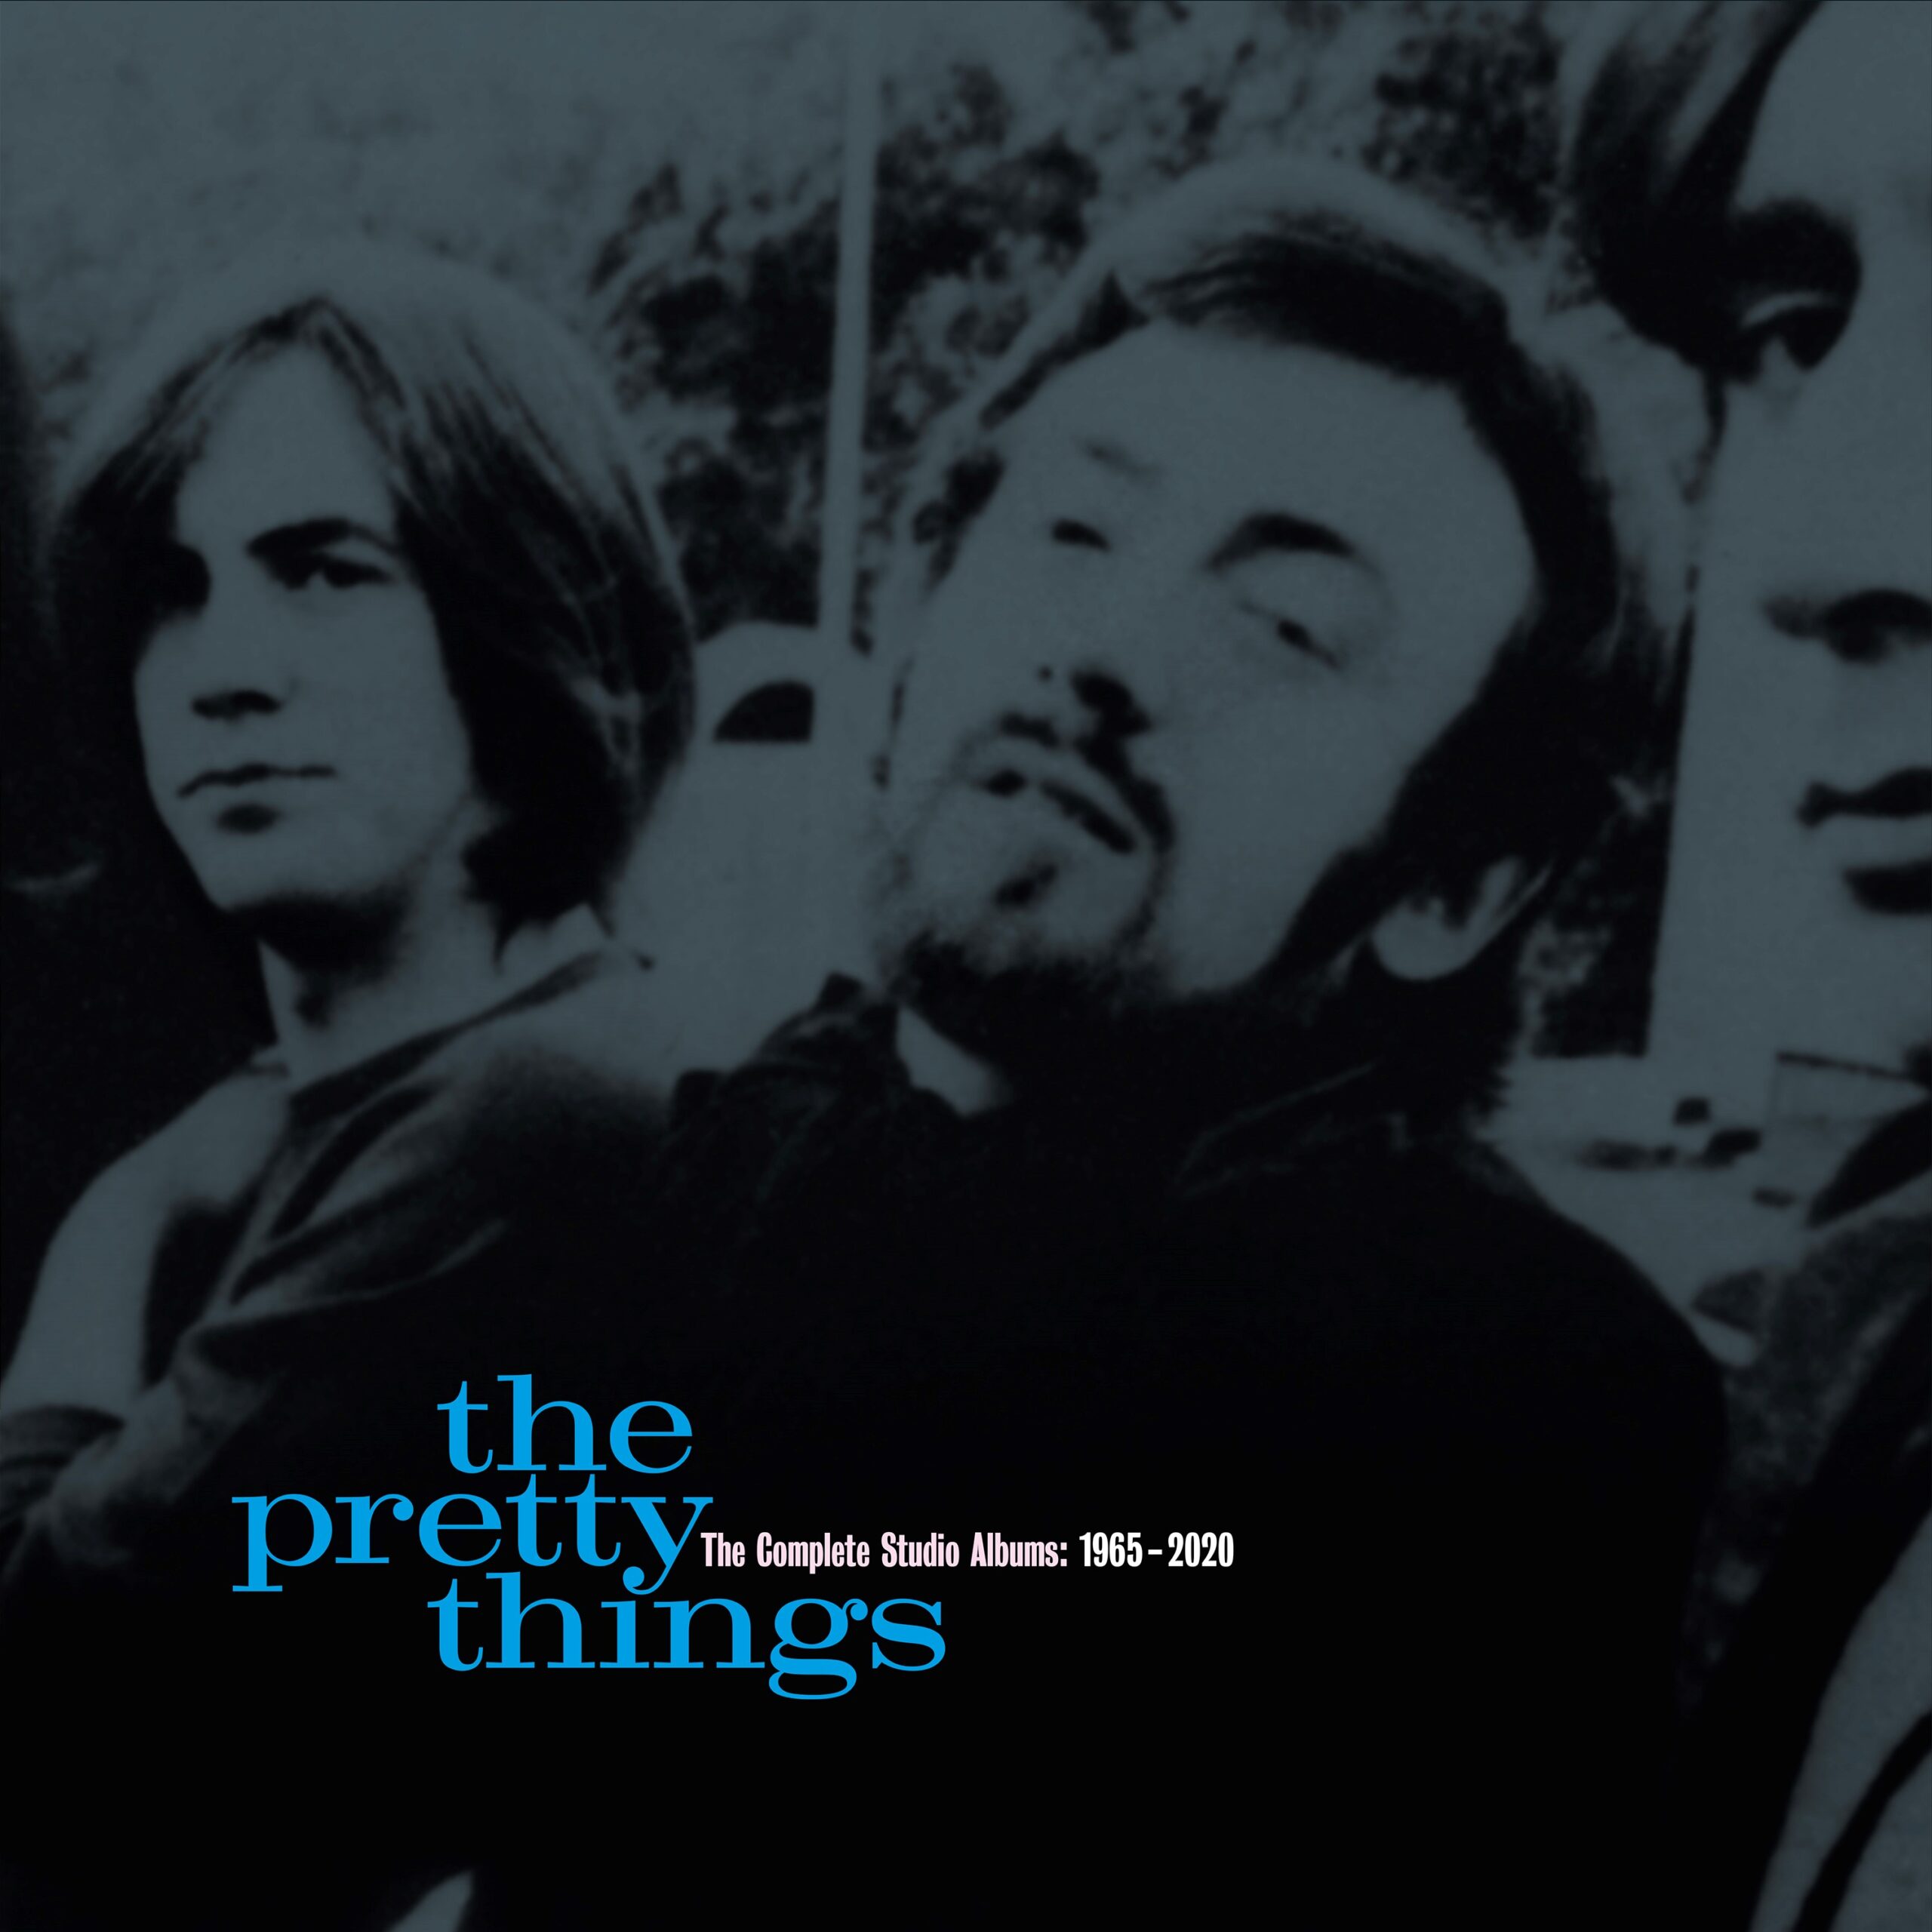 Span 13. The pretty things Electric Banana. The pretty things - Greatest Hits 2017. Four Tops 1965 - second album. The be Bop Deluxe Singles as&BS.